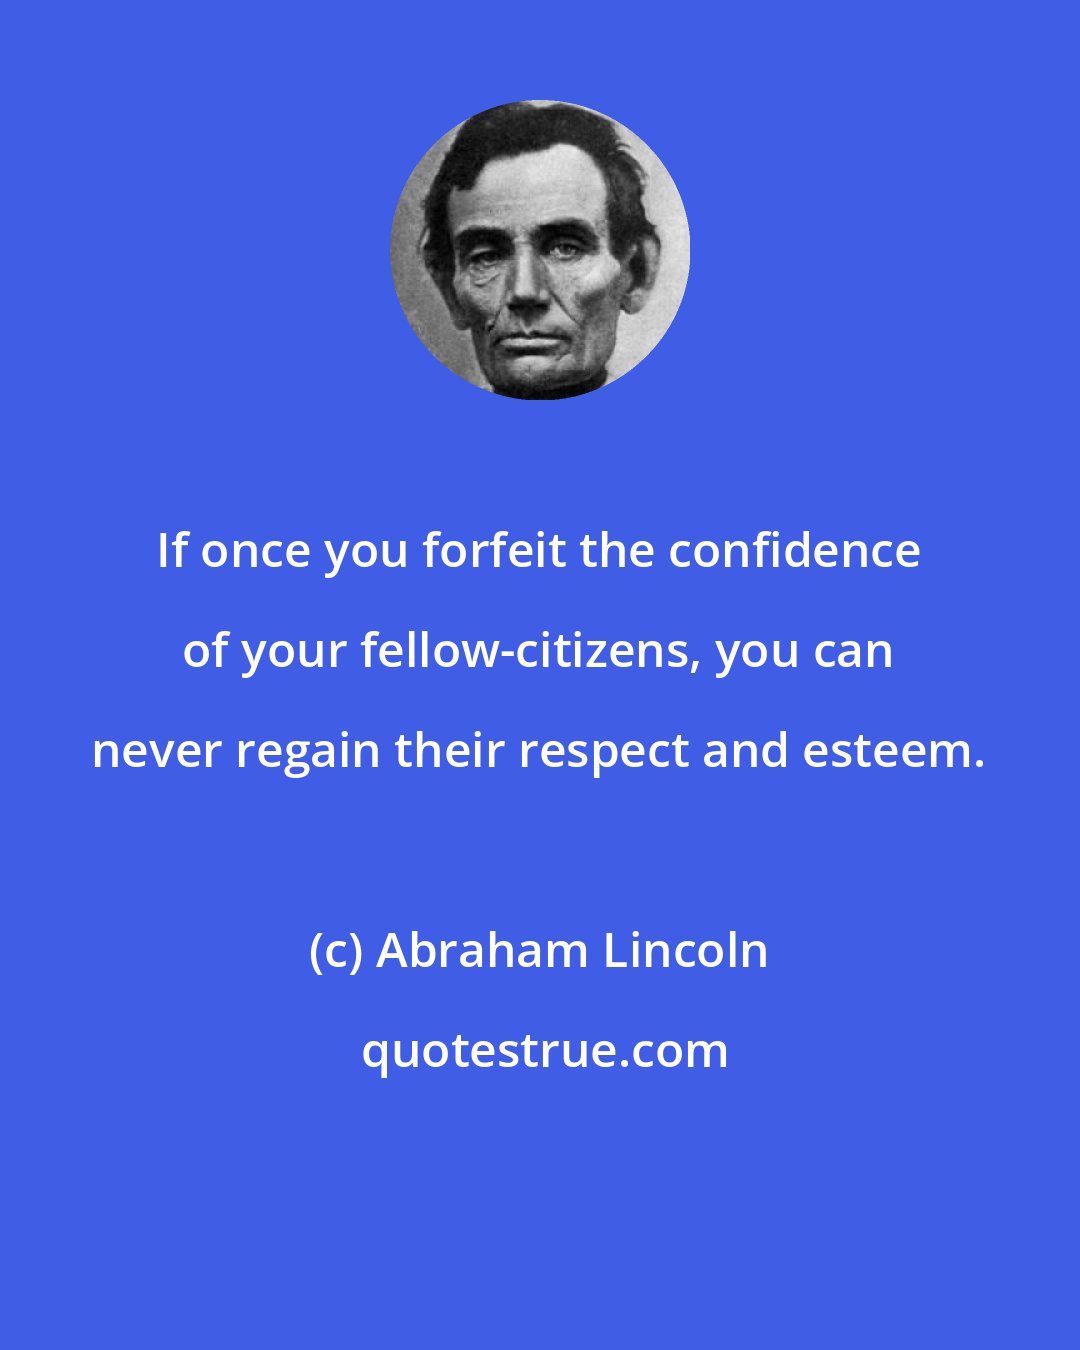 Abraham Lincoln: If once you forfeit the confidence of your fellow-citizens, you can never regain their respect and esteem.